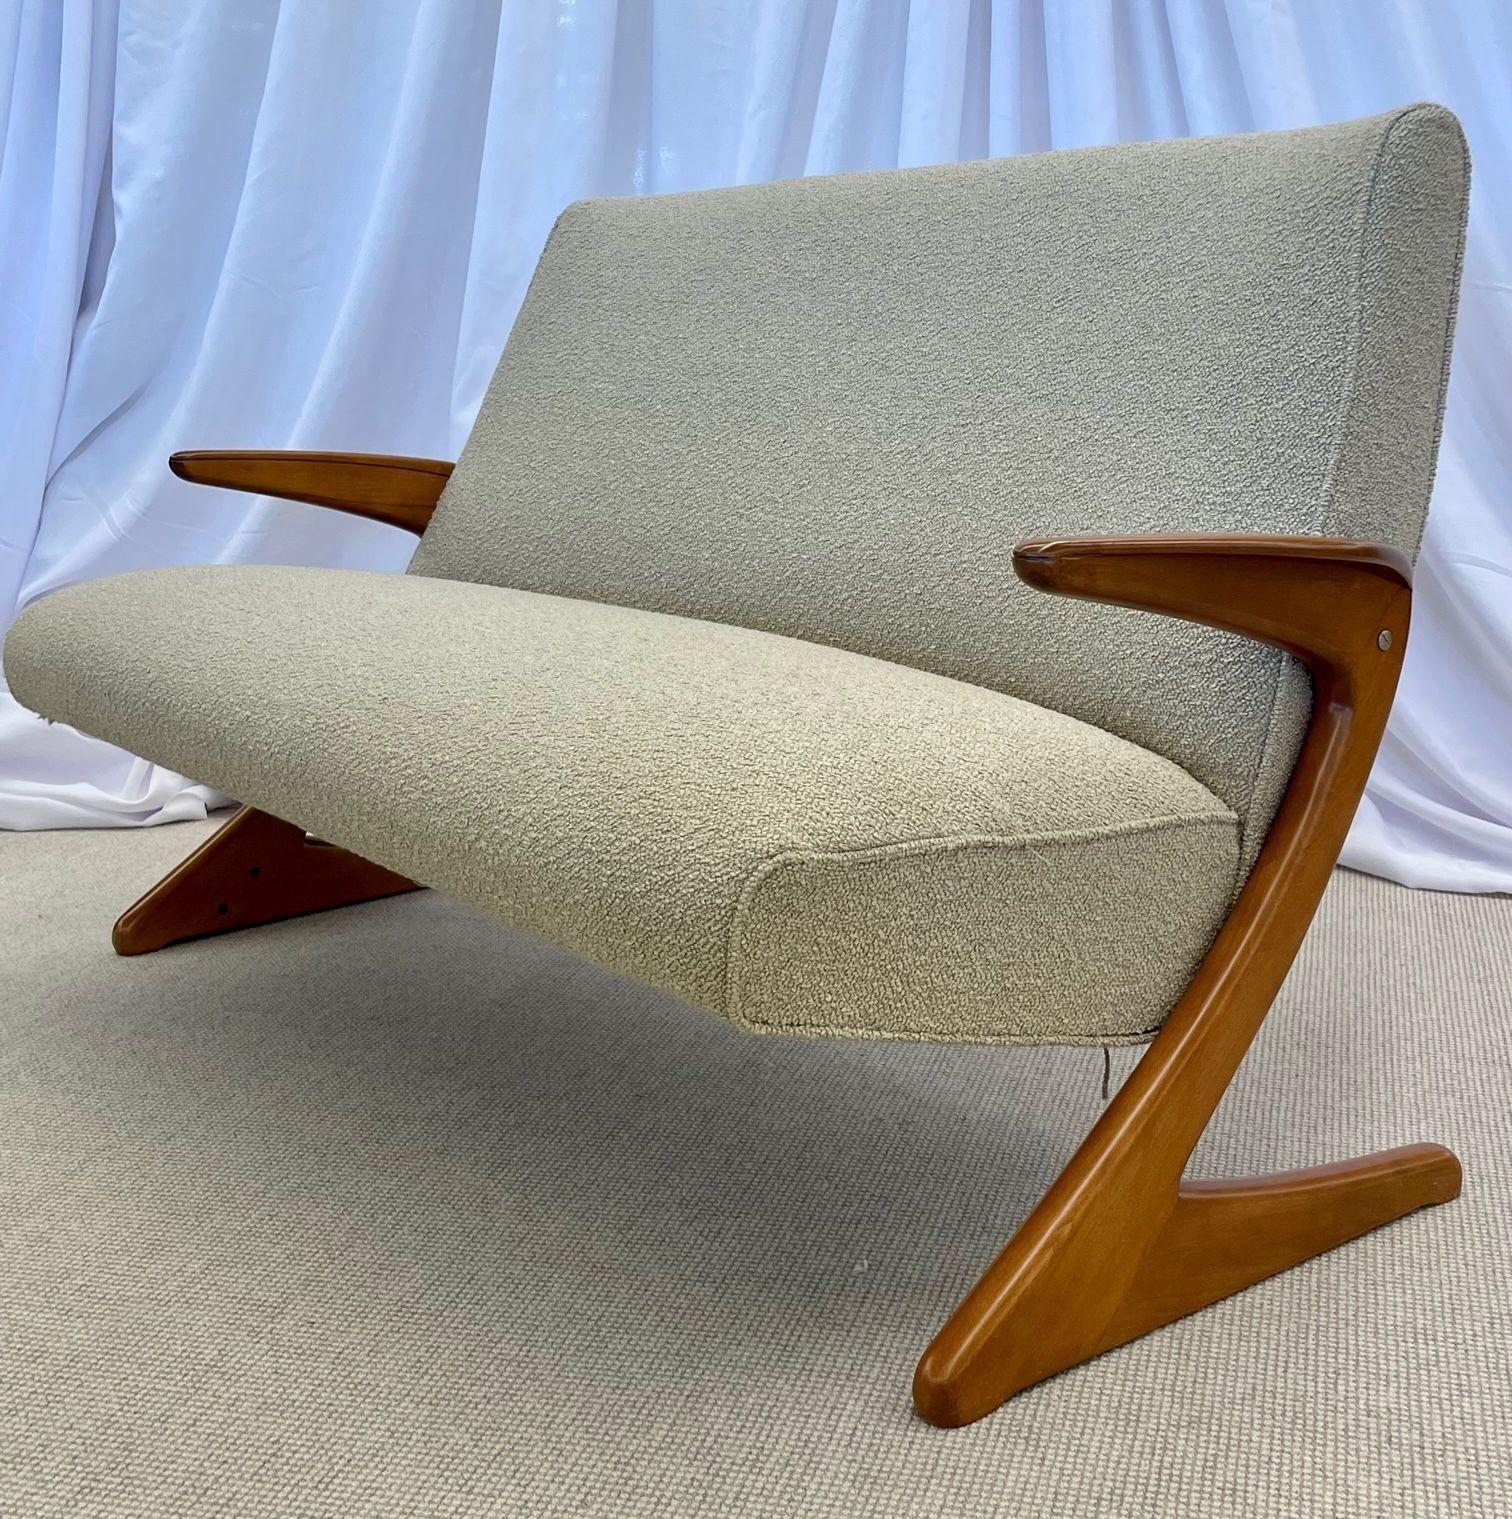 Mid-Century Modern Z sofa by Bengt Ruda for Nordiska Kompaniet, 1960's.
 
Mid-Century 'Z' sofa from the Triva-series for Nordiska Kompaniet by Swedish artist and designer Bengt Ruda. Newly upholstered in a luxurious, nubby, tan boucle fabric while